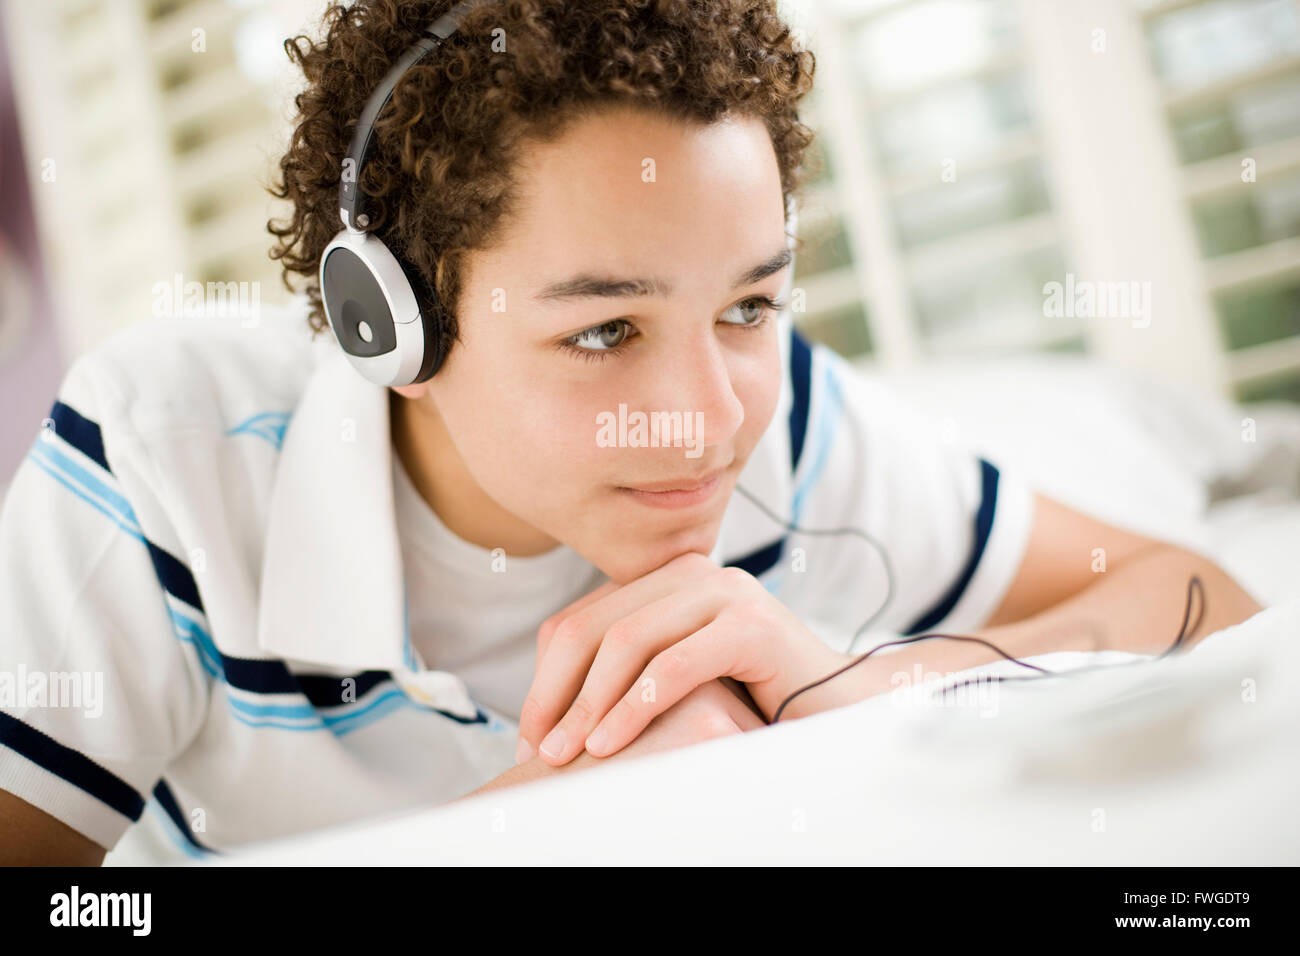 A boy wearing headphones lying on his stomach. Stock Photo